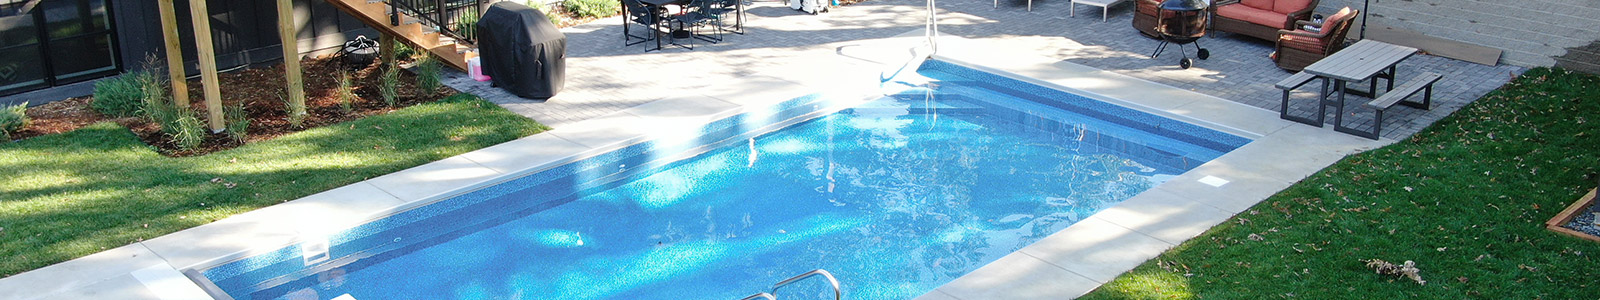 In-Ground Swimming Pool Installed by Royal Pool & Spa in Minneapolis